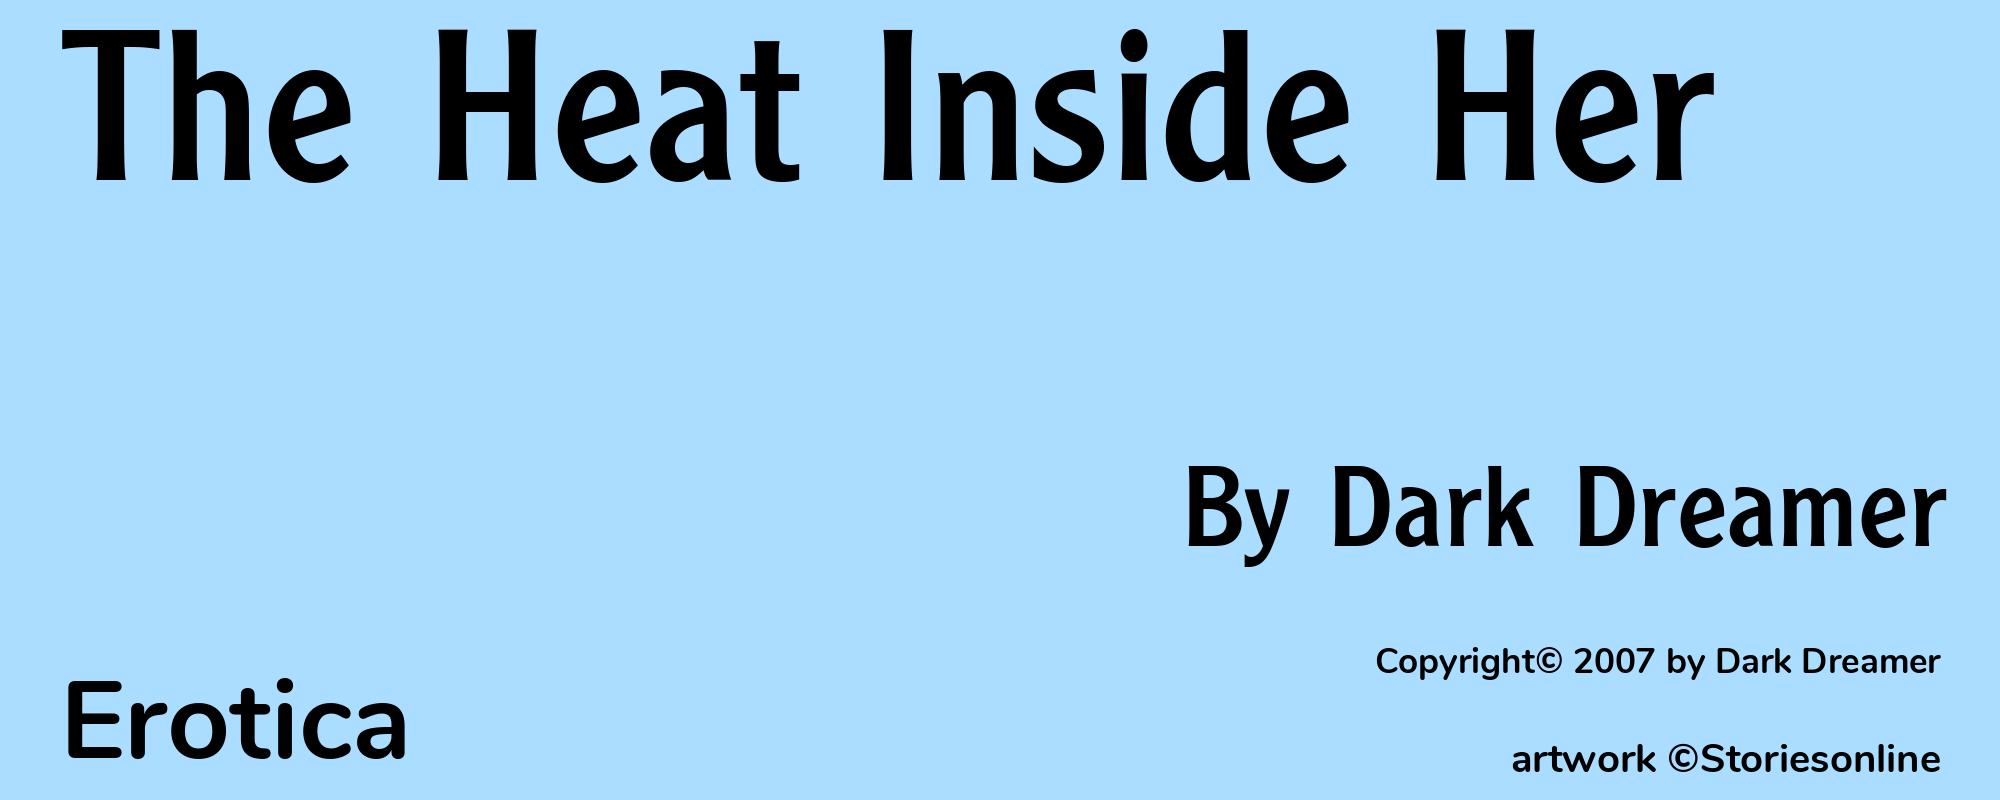 The Heat Inside Her - Cover